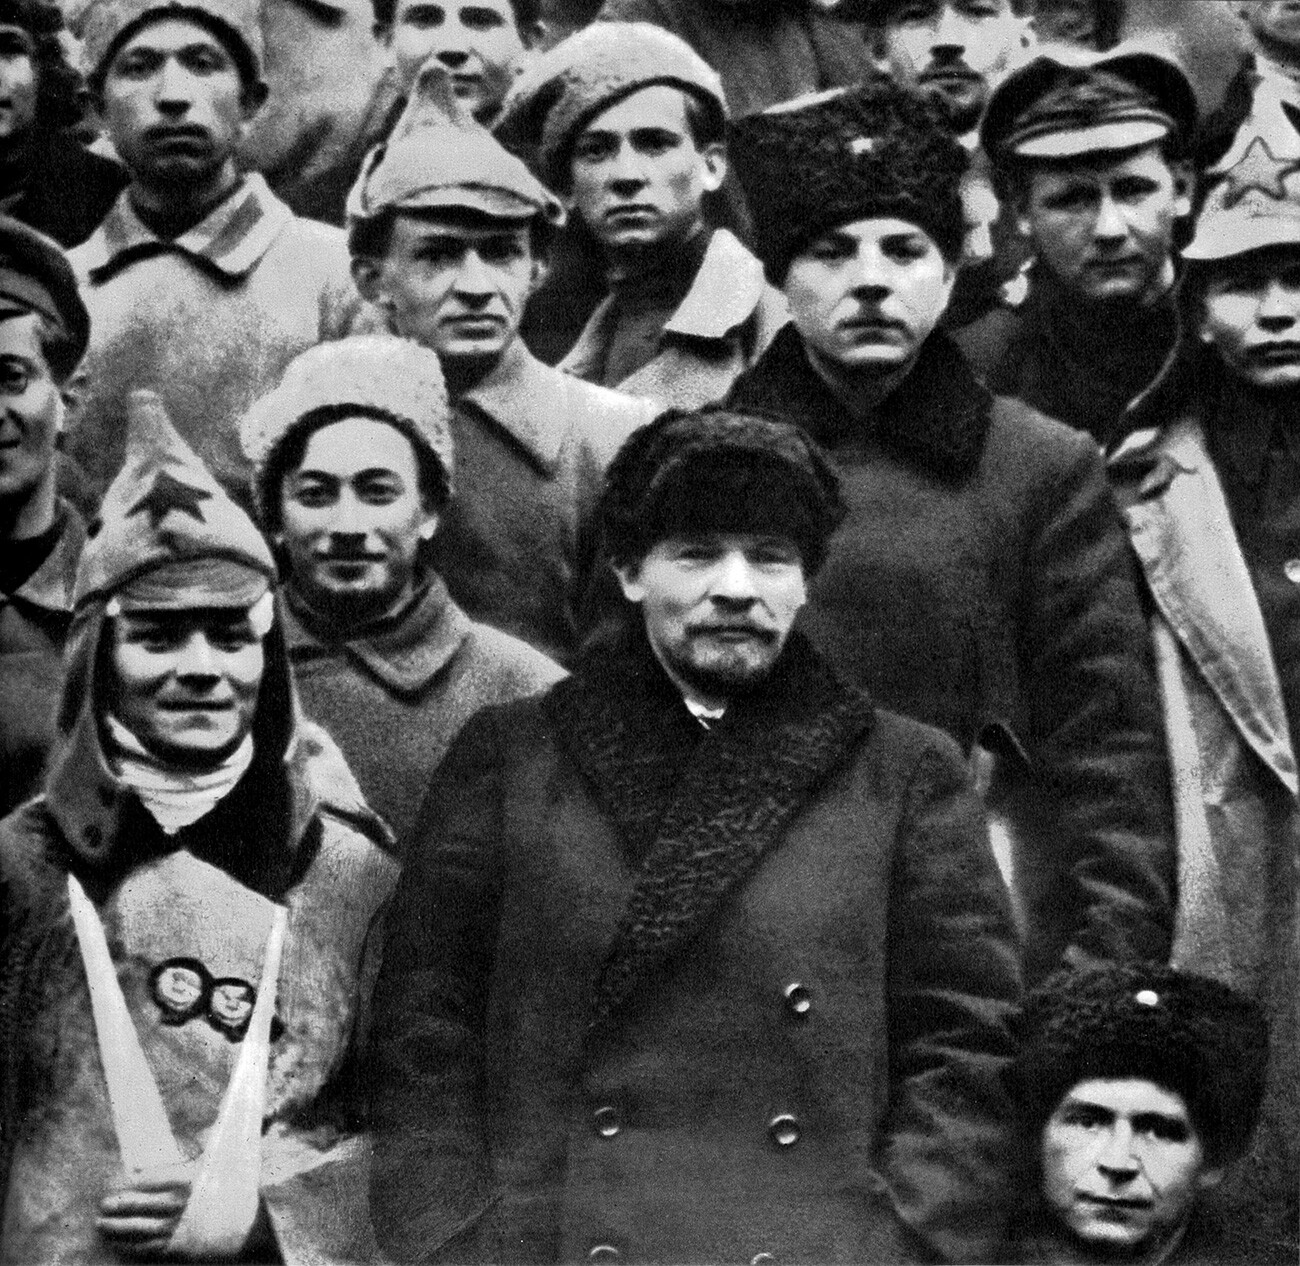 Vladimir Lenin and soldiers who participated in the suppression of the mutiny in Kronstadt.